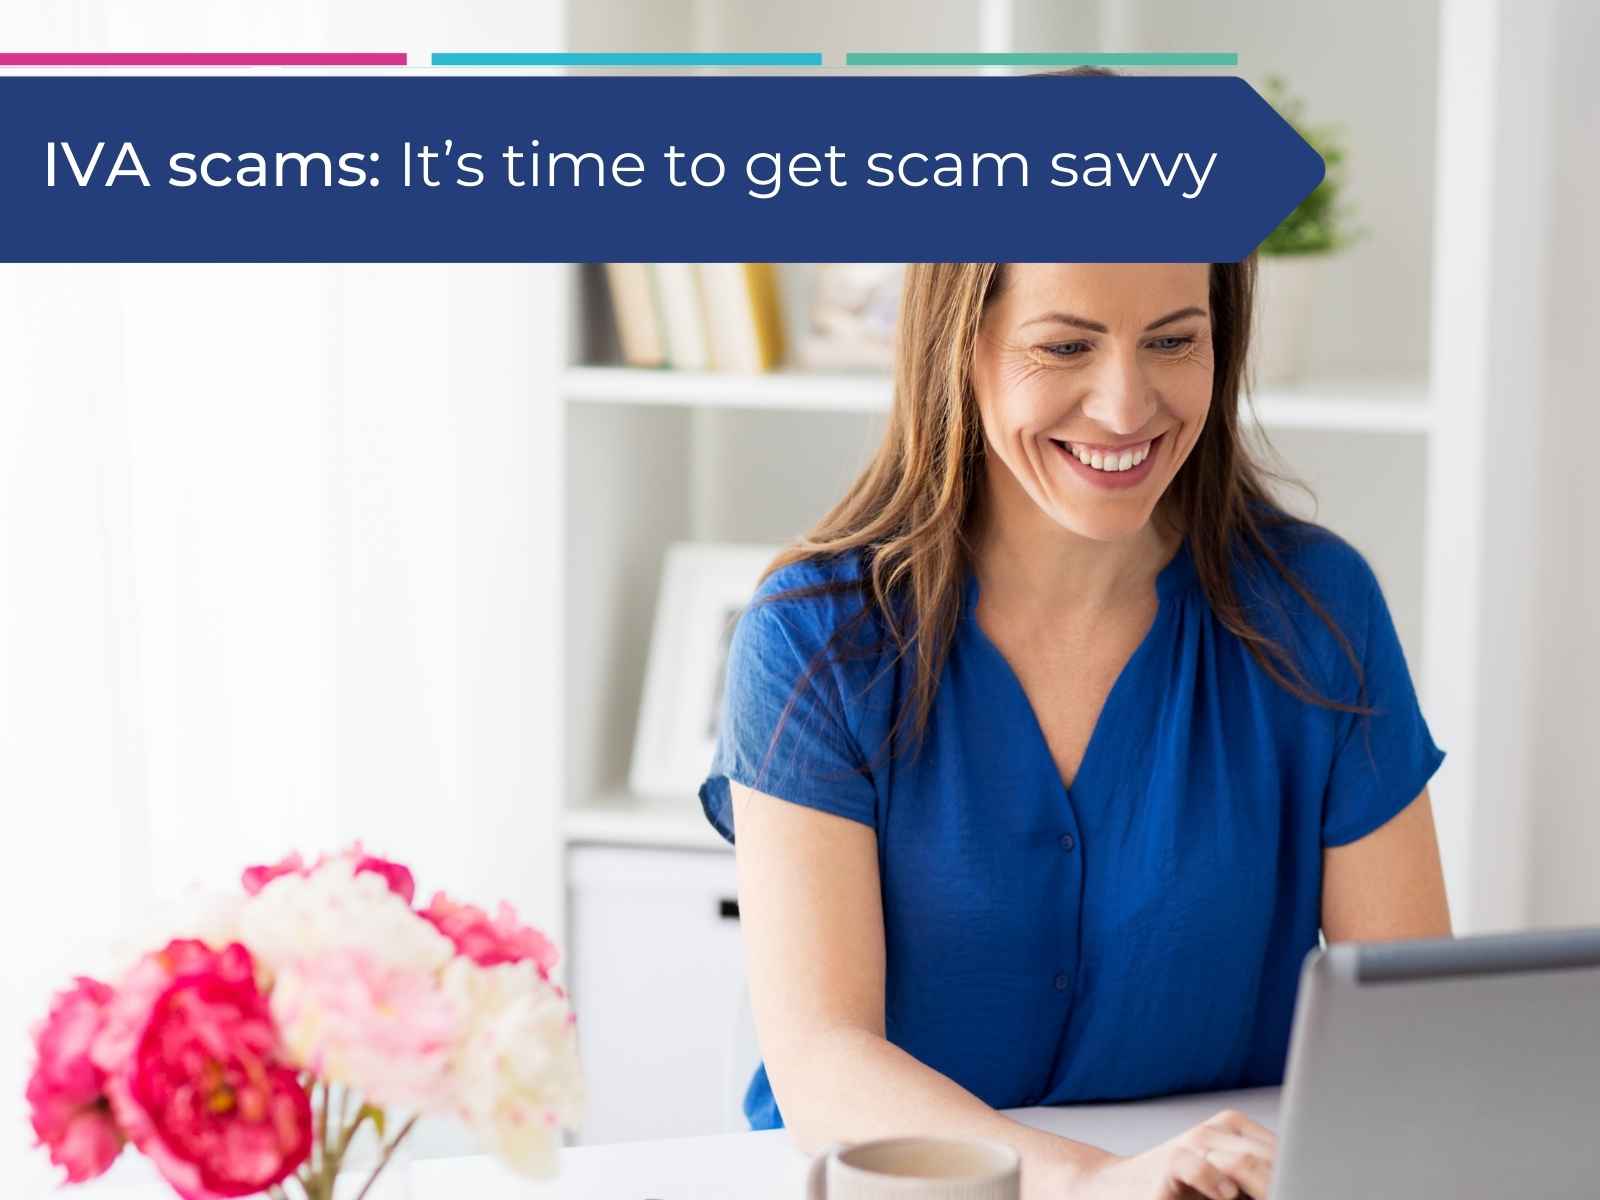 Woman researching IVA scams to become scam savvy